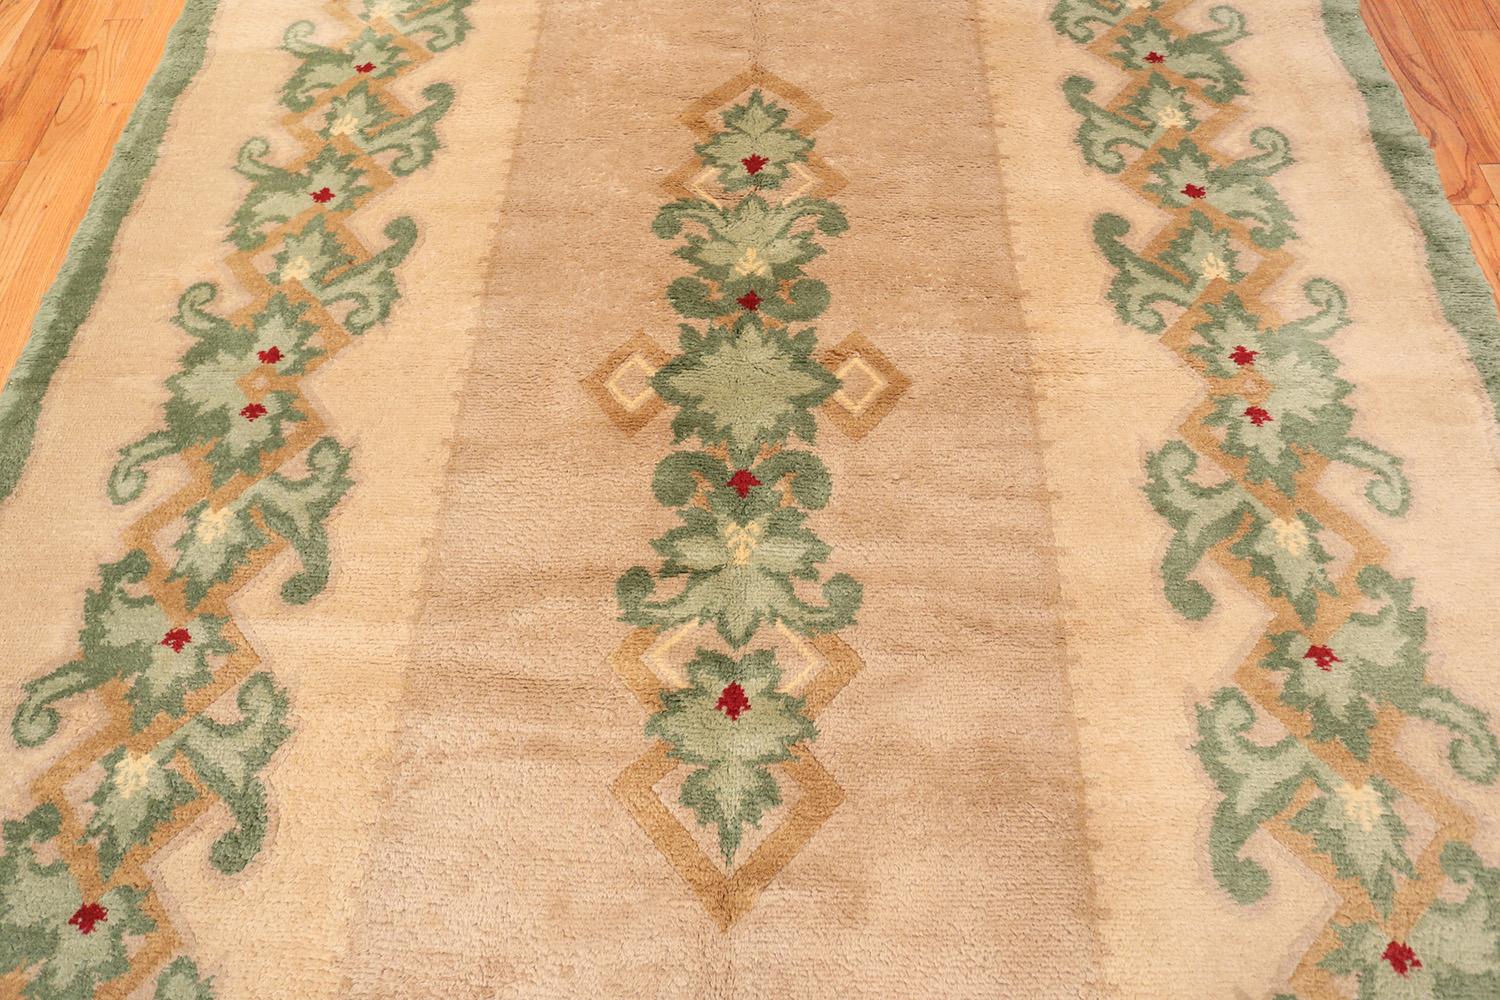 Hand-Knotted Antique French Art Deco Rug by Leleu. Size: 7 ft 10 in x 12 ft 10 in